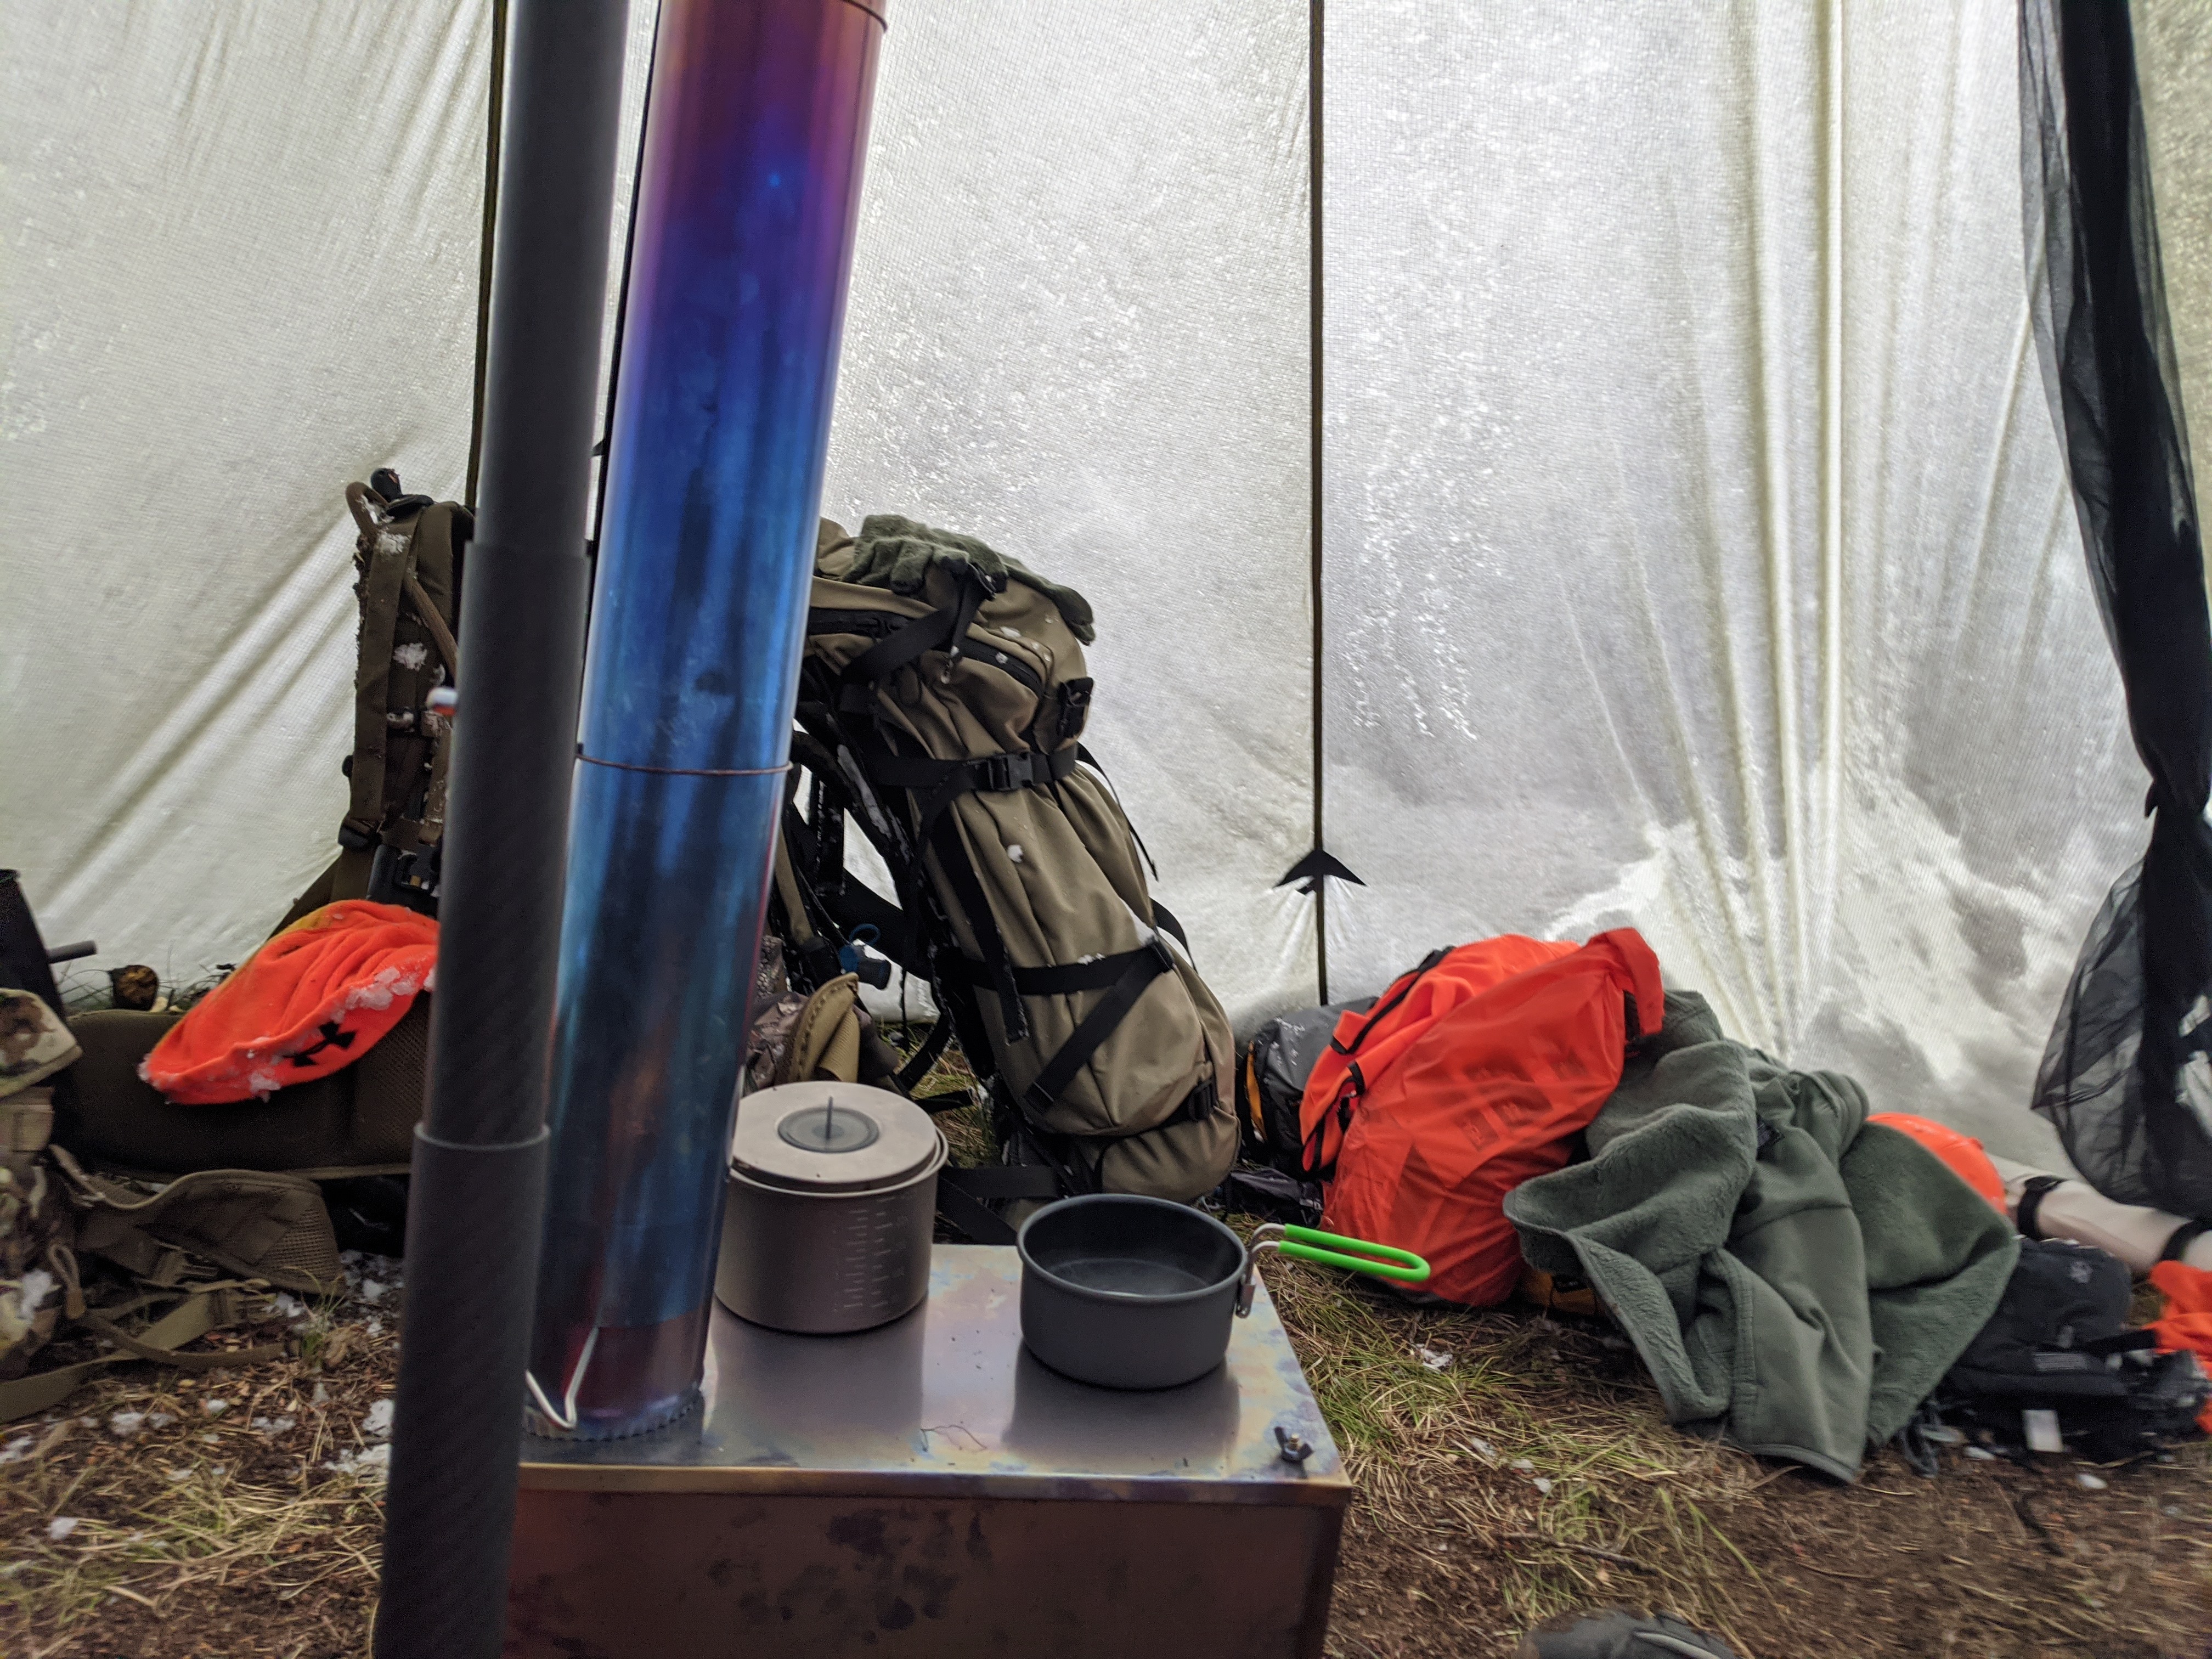 The stove is the center point of any hot tent setup, especially so in the SeekOutside Tipi.